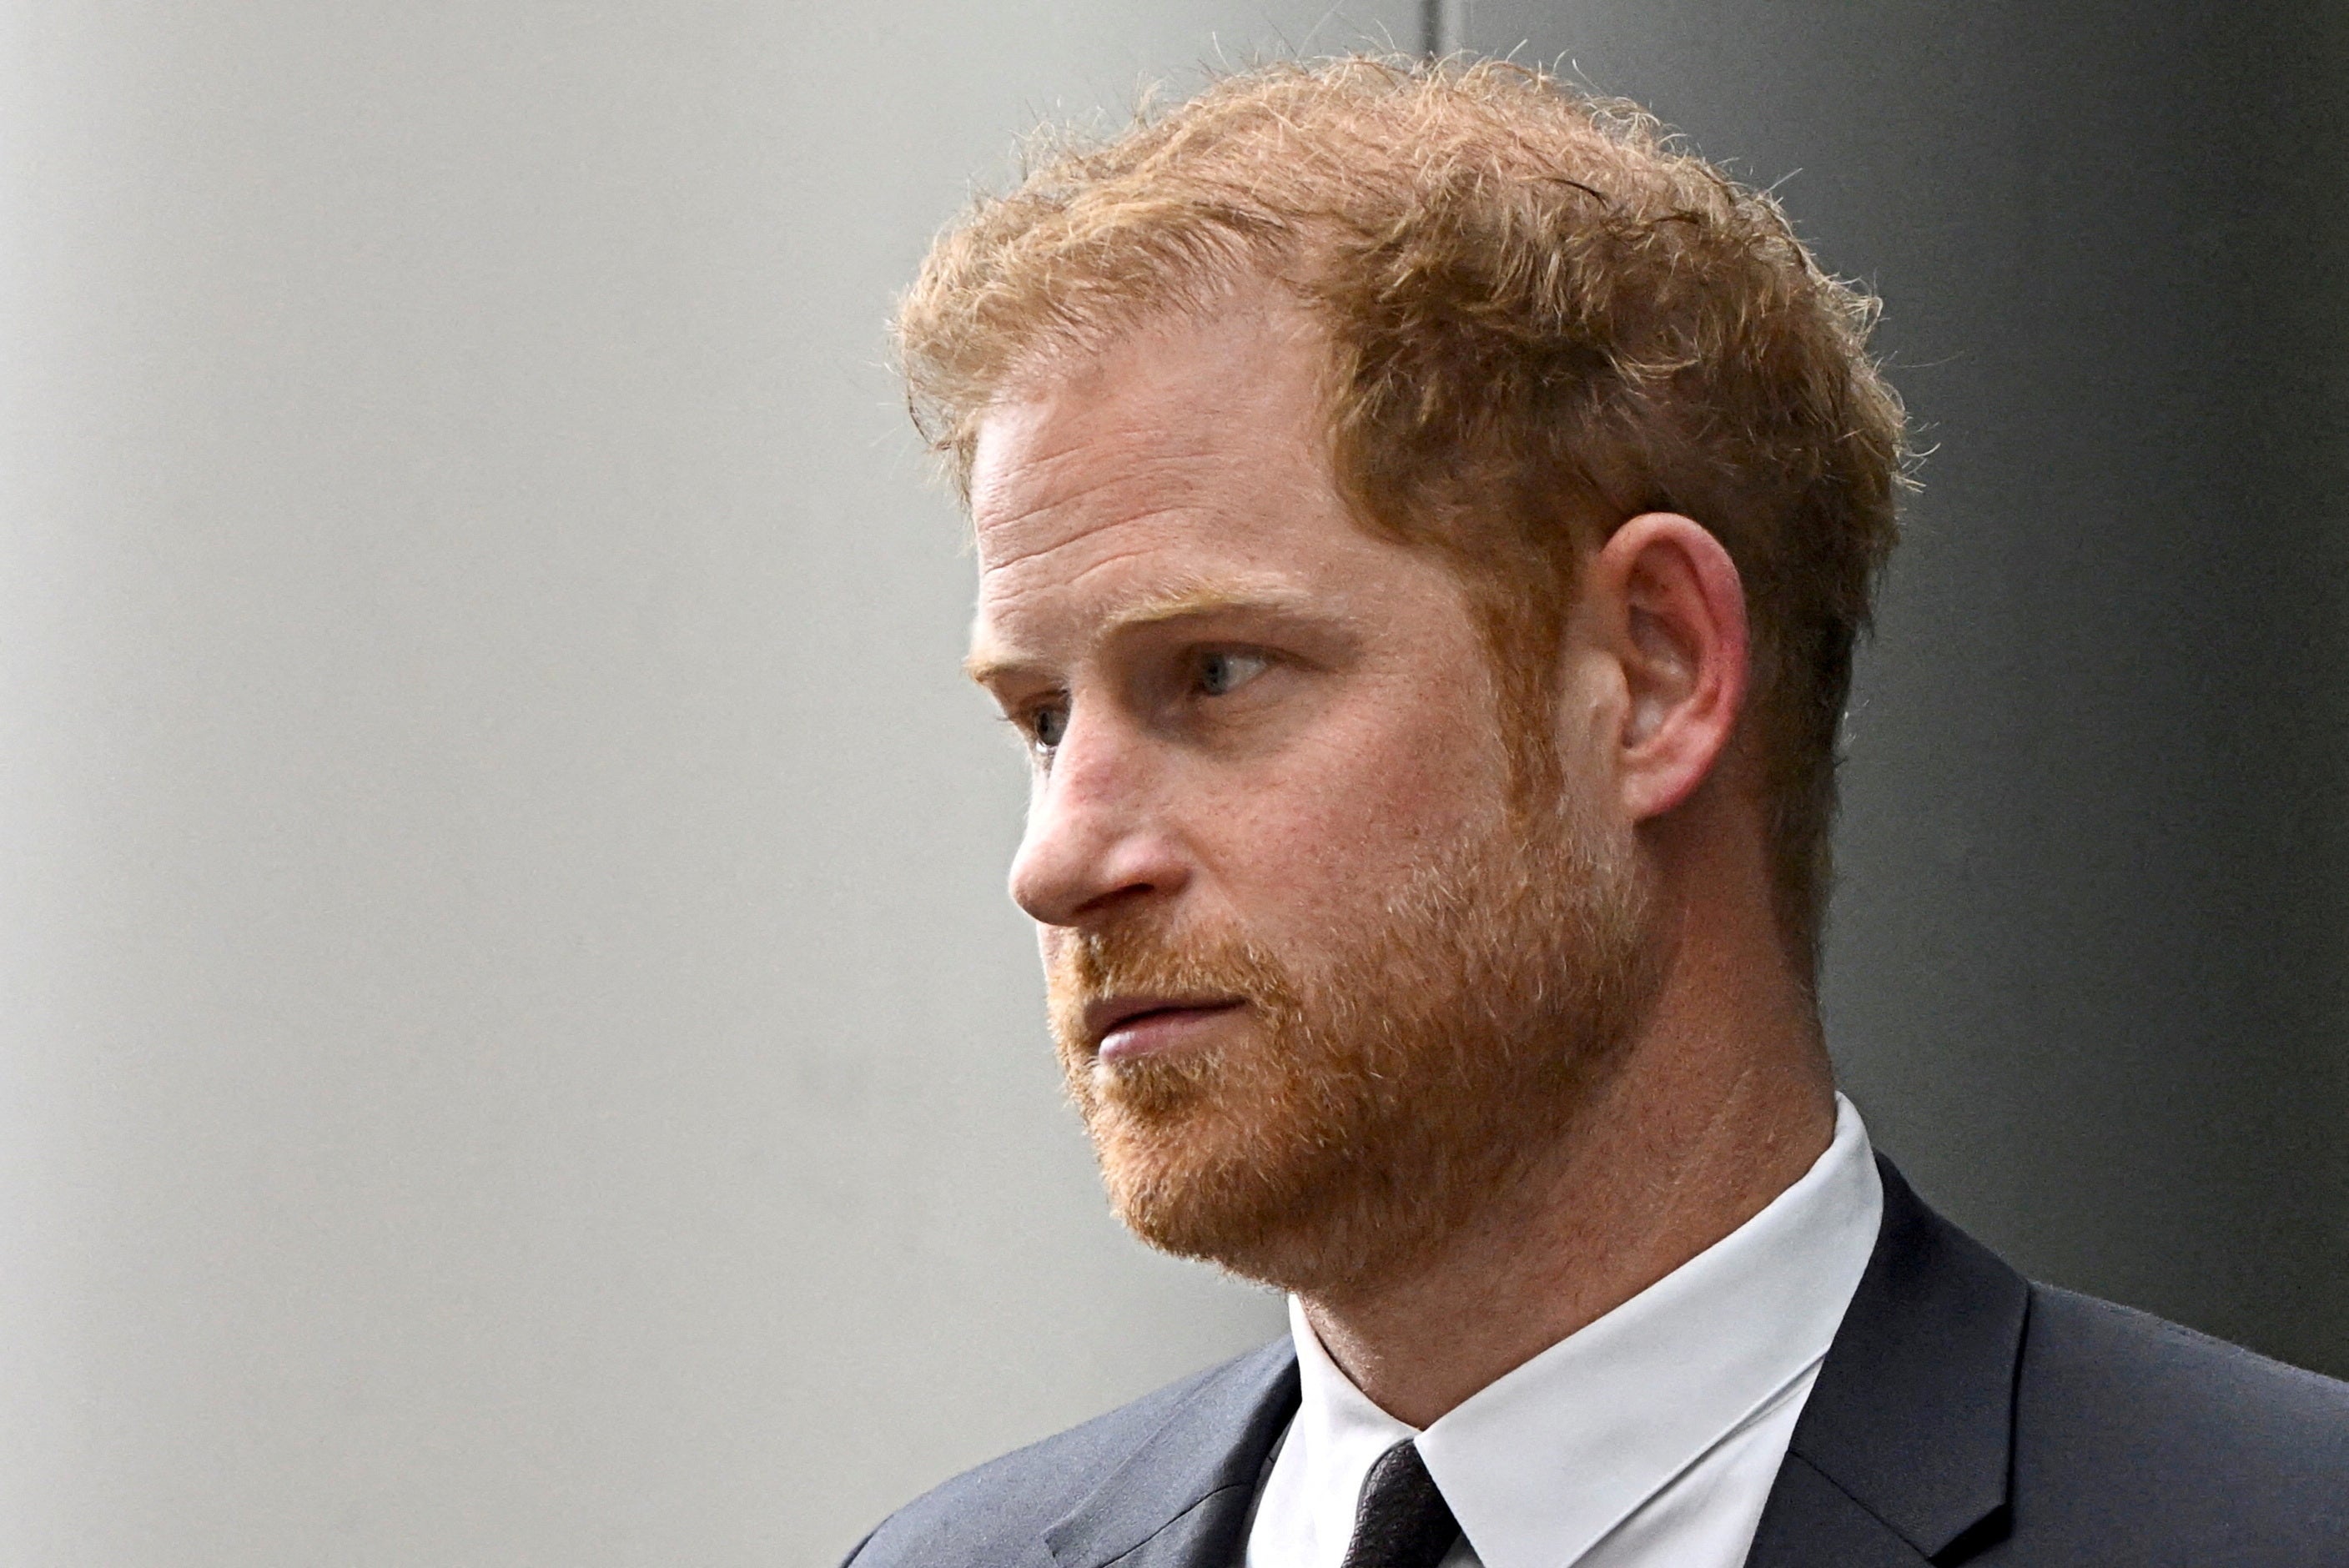 Prince Harry has been named in the lawsuit as an example of a well-known associate of the rapper